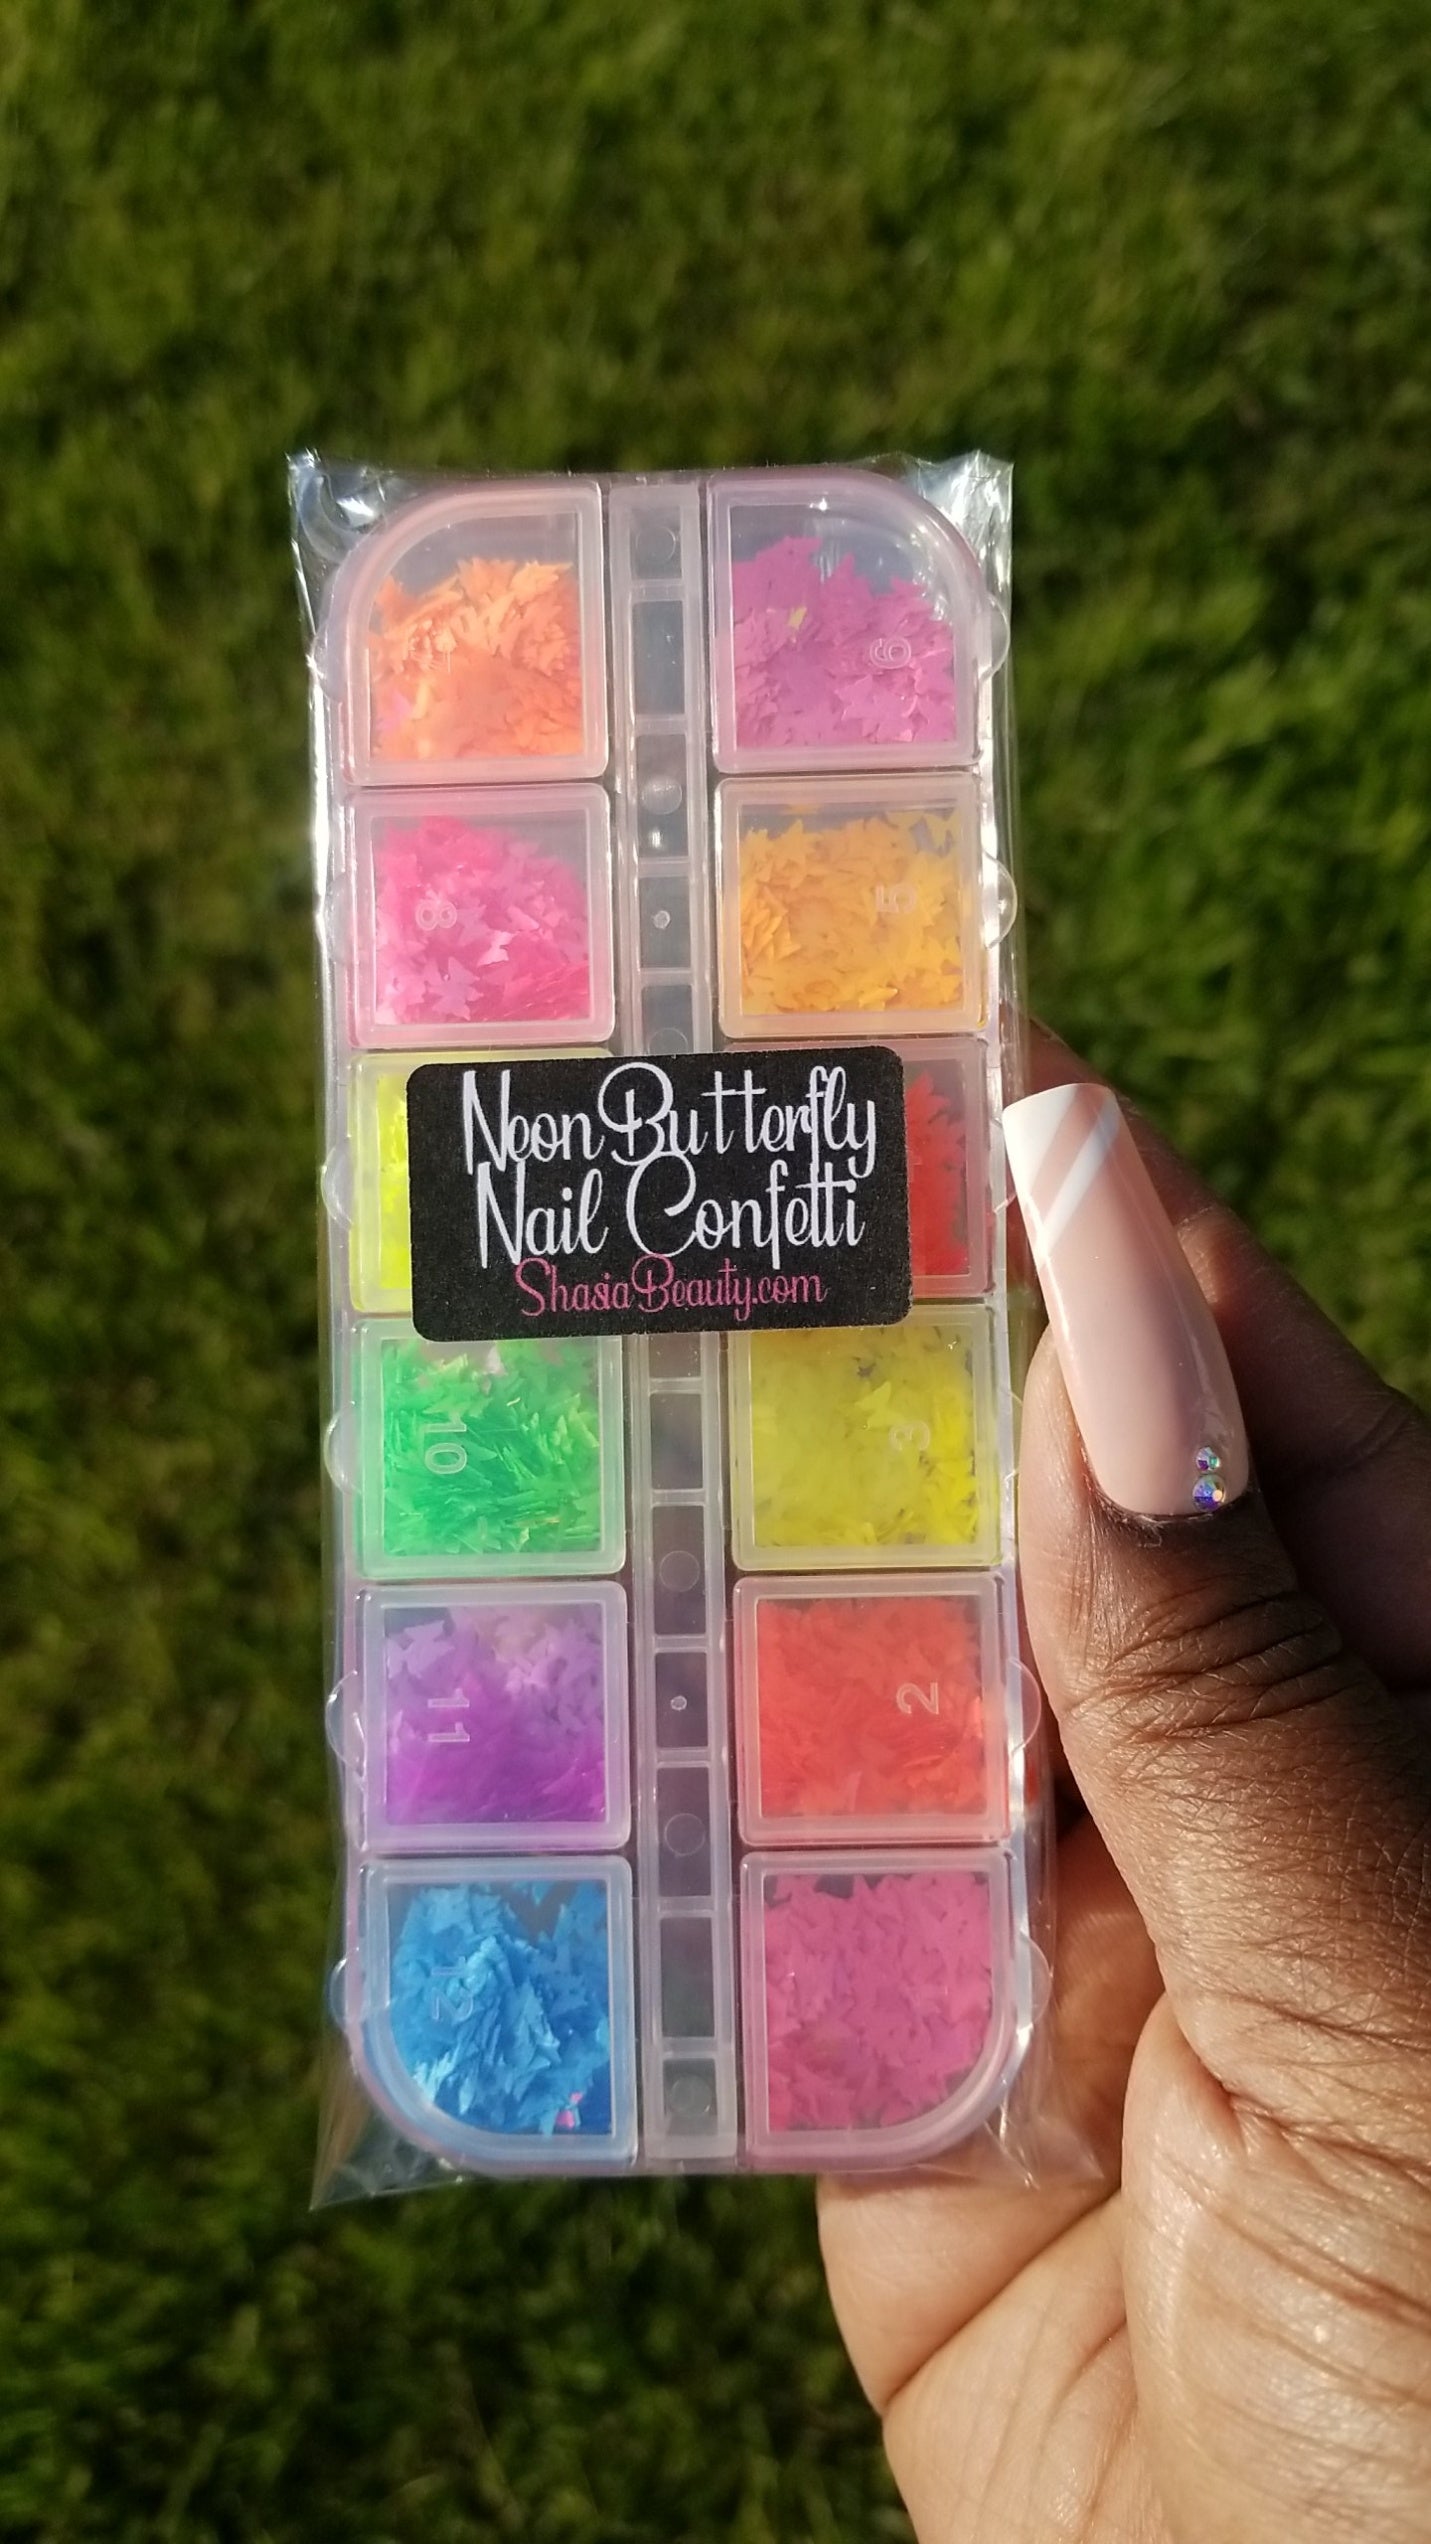 Neon Butterfly Nail Confetti